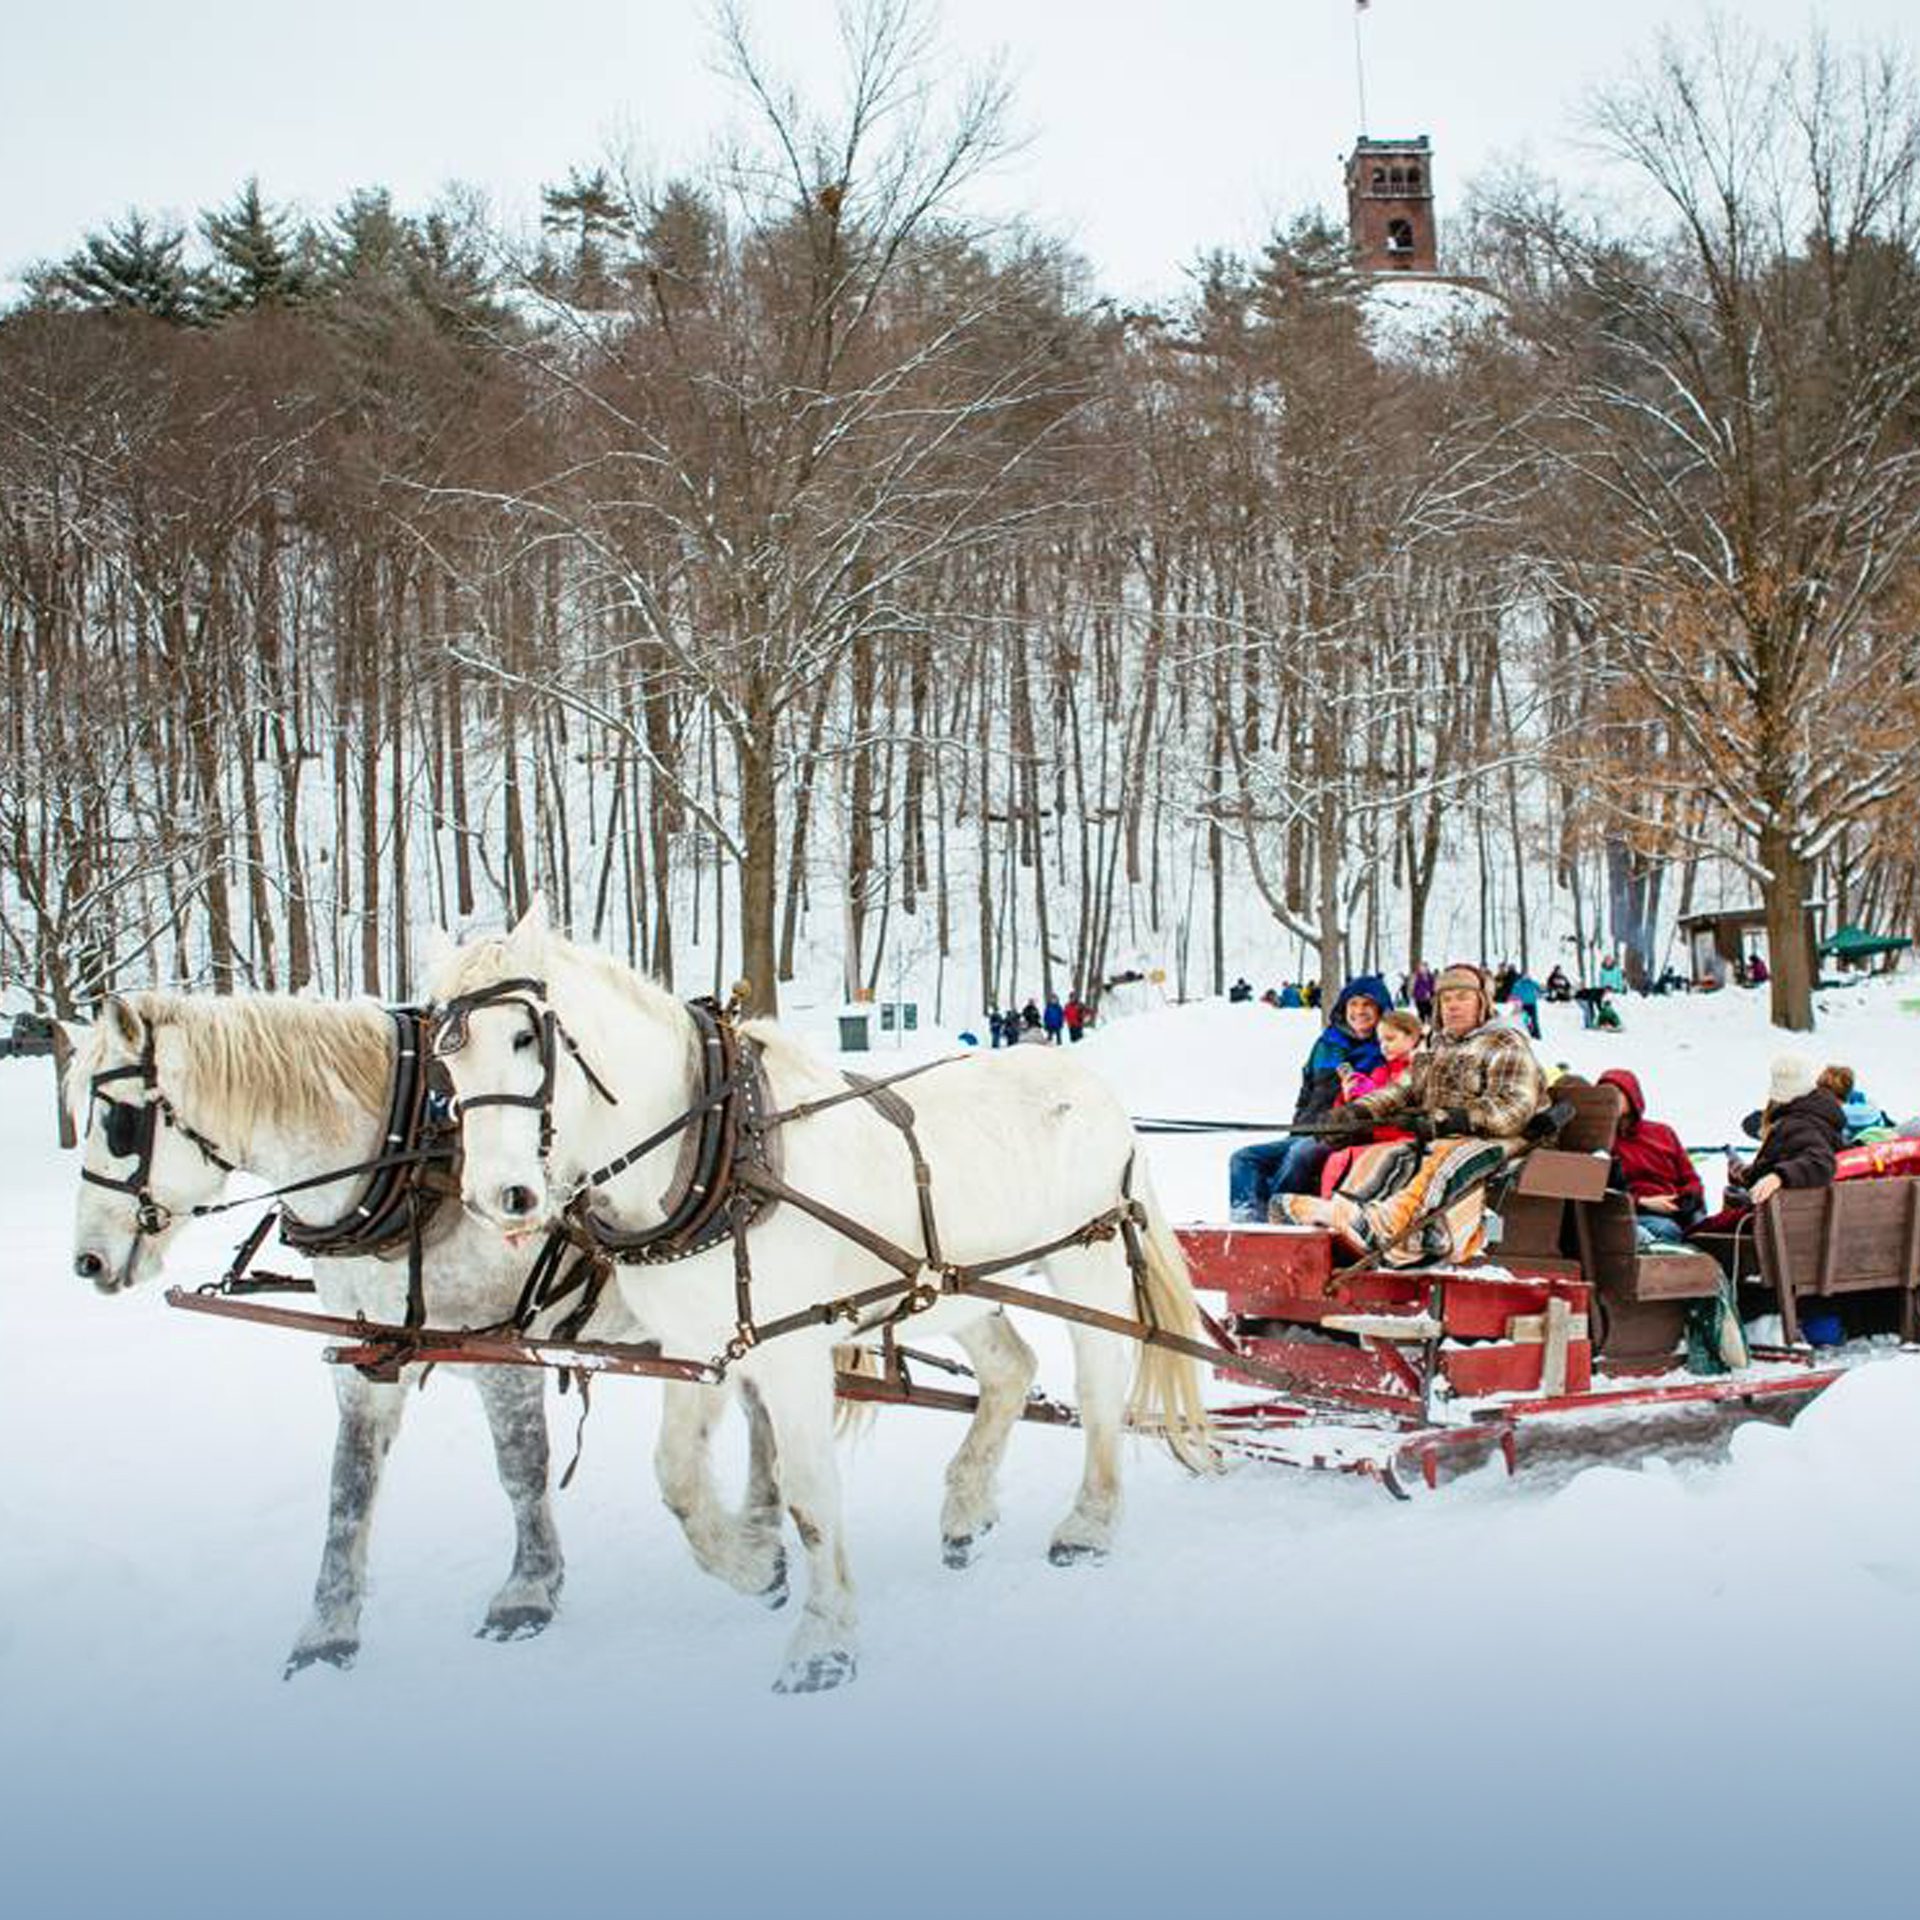 horse-drawn sleigh at Greenfield's Winter Carnival